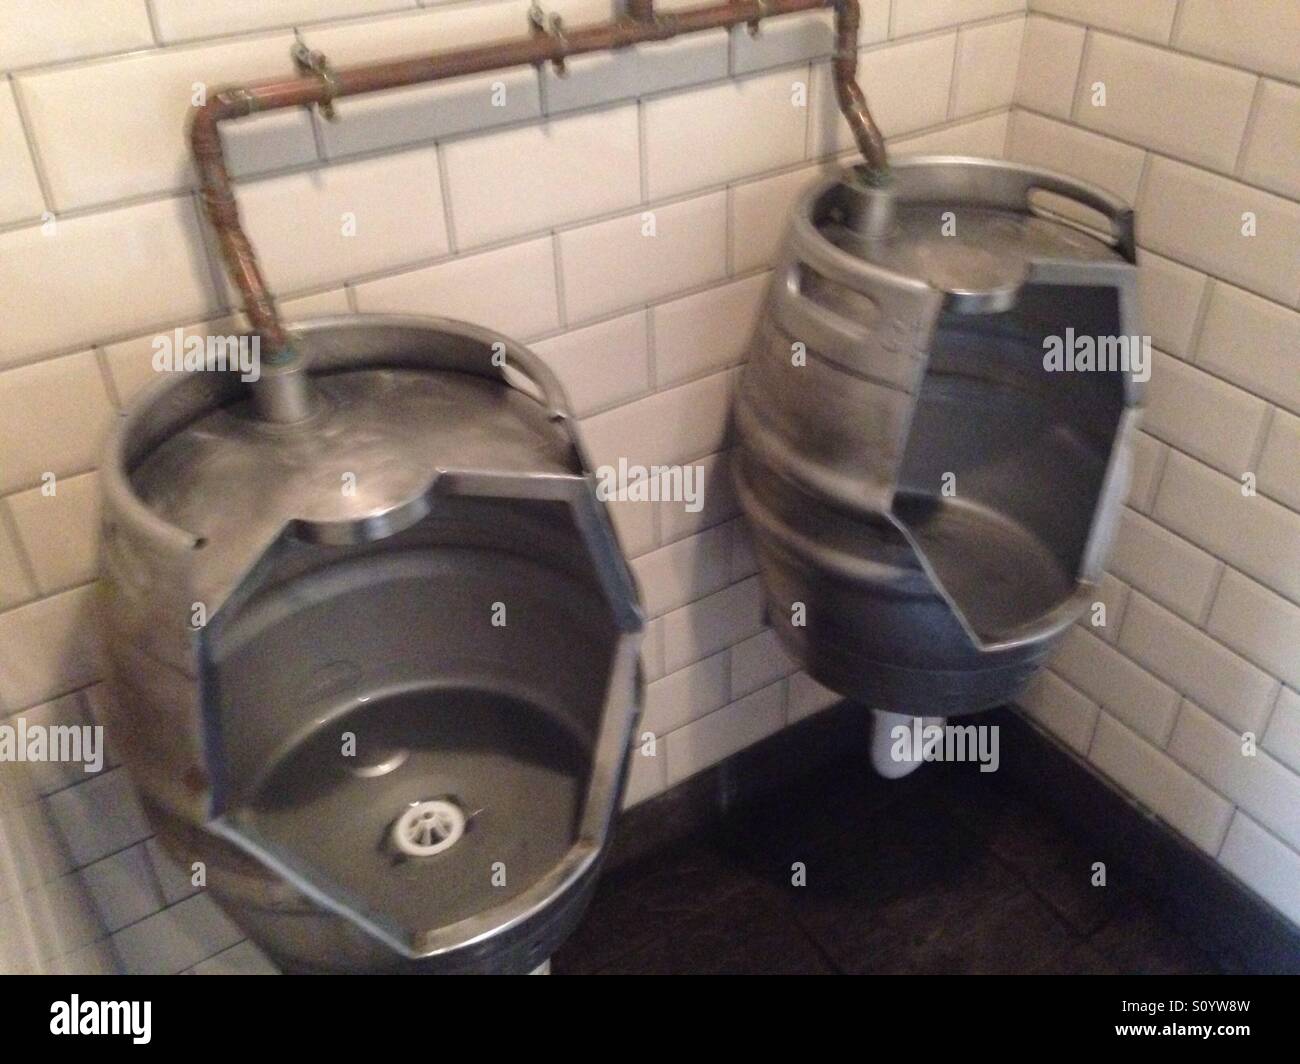 Pub men's urinals made from beer kegs Stock Photo